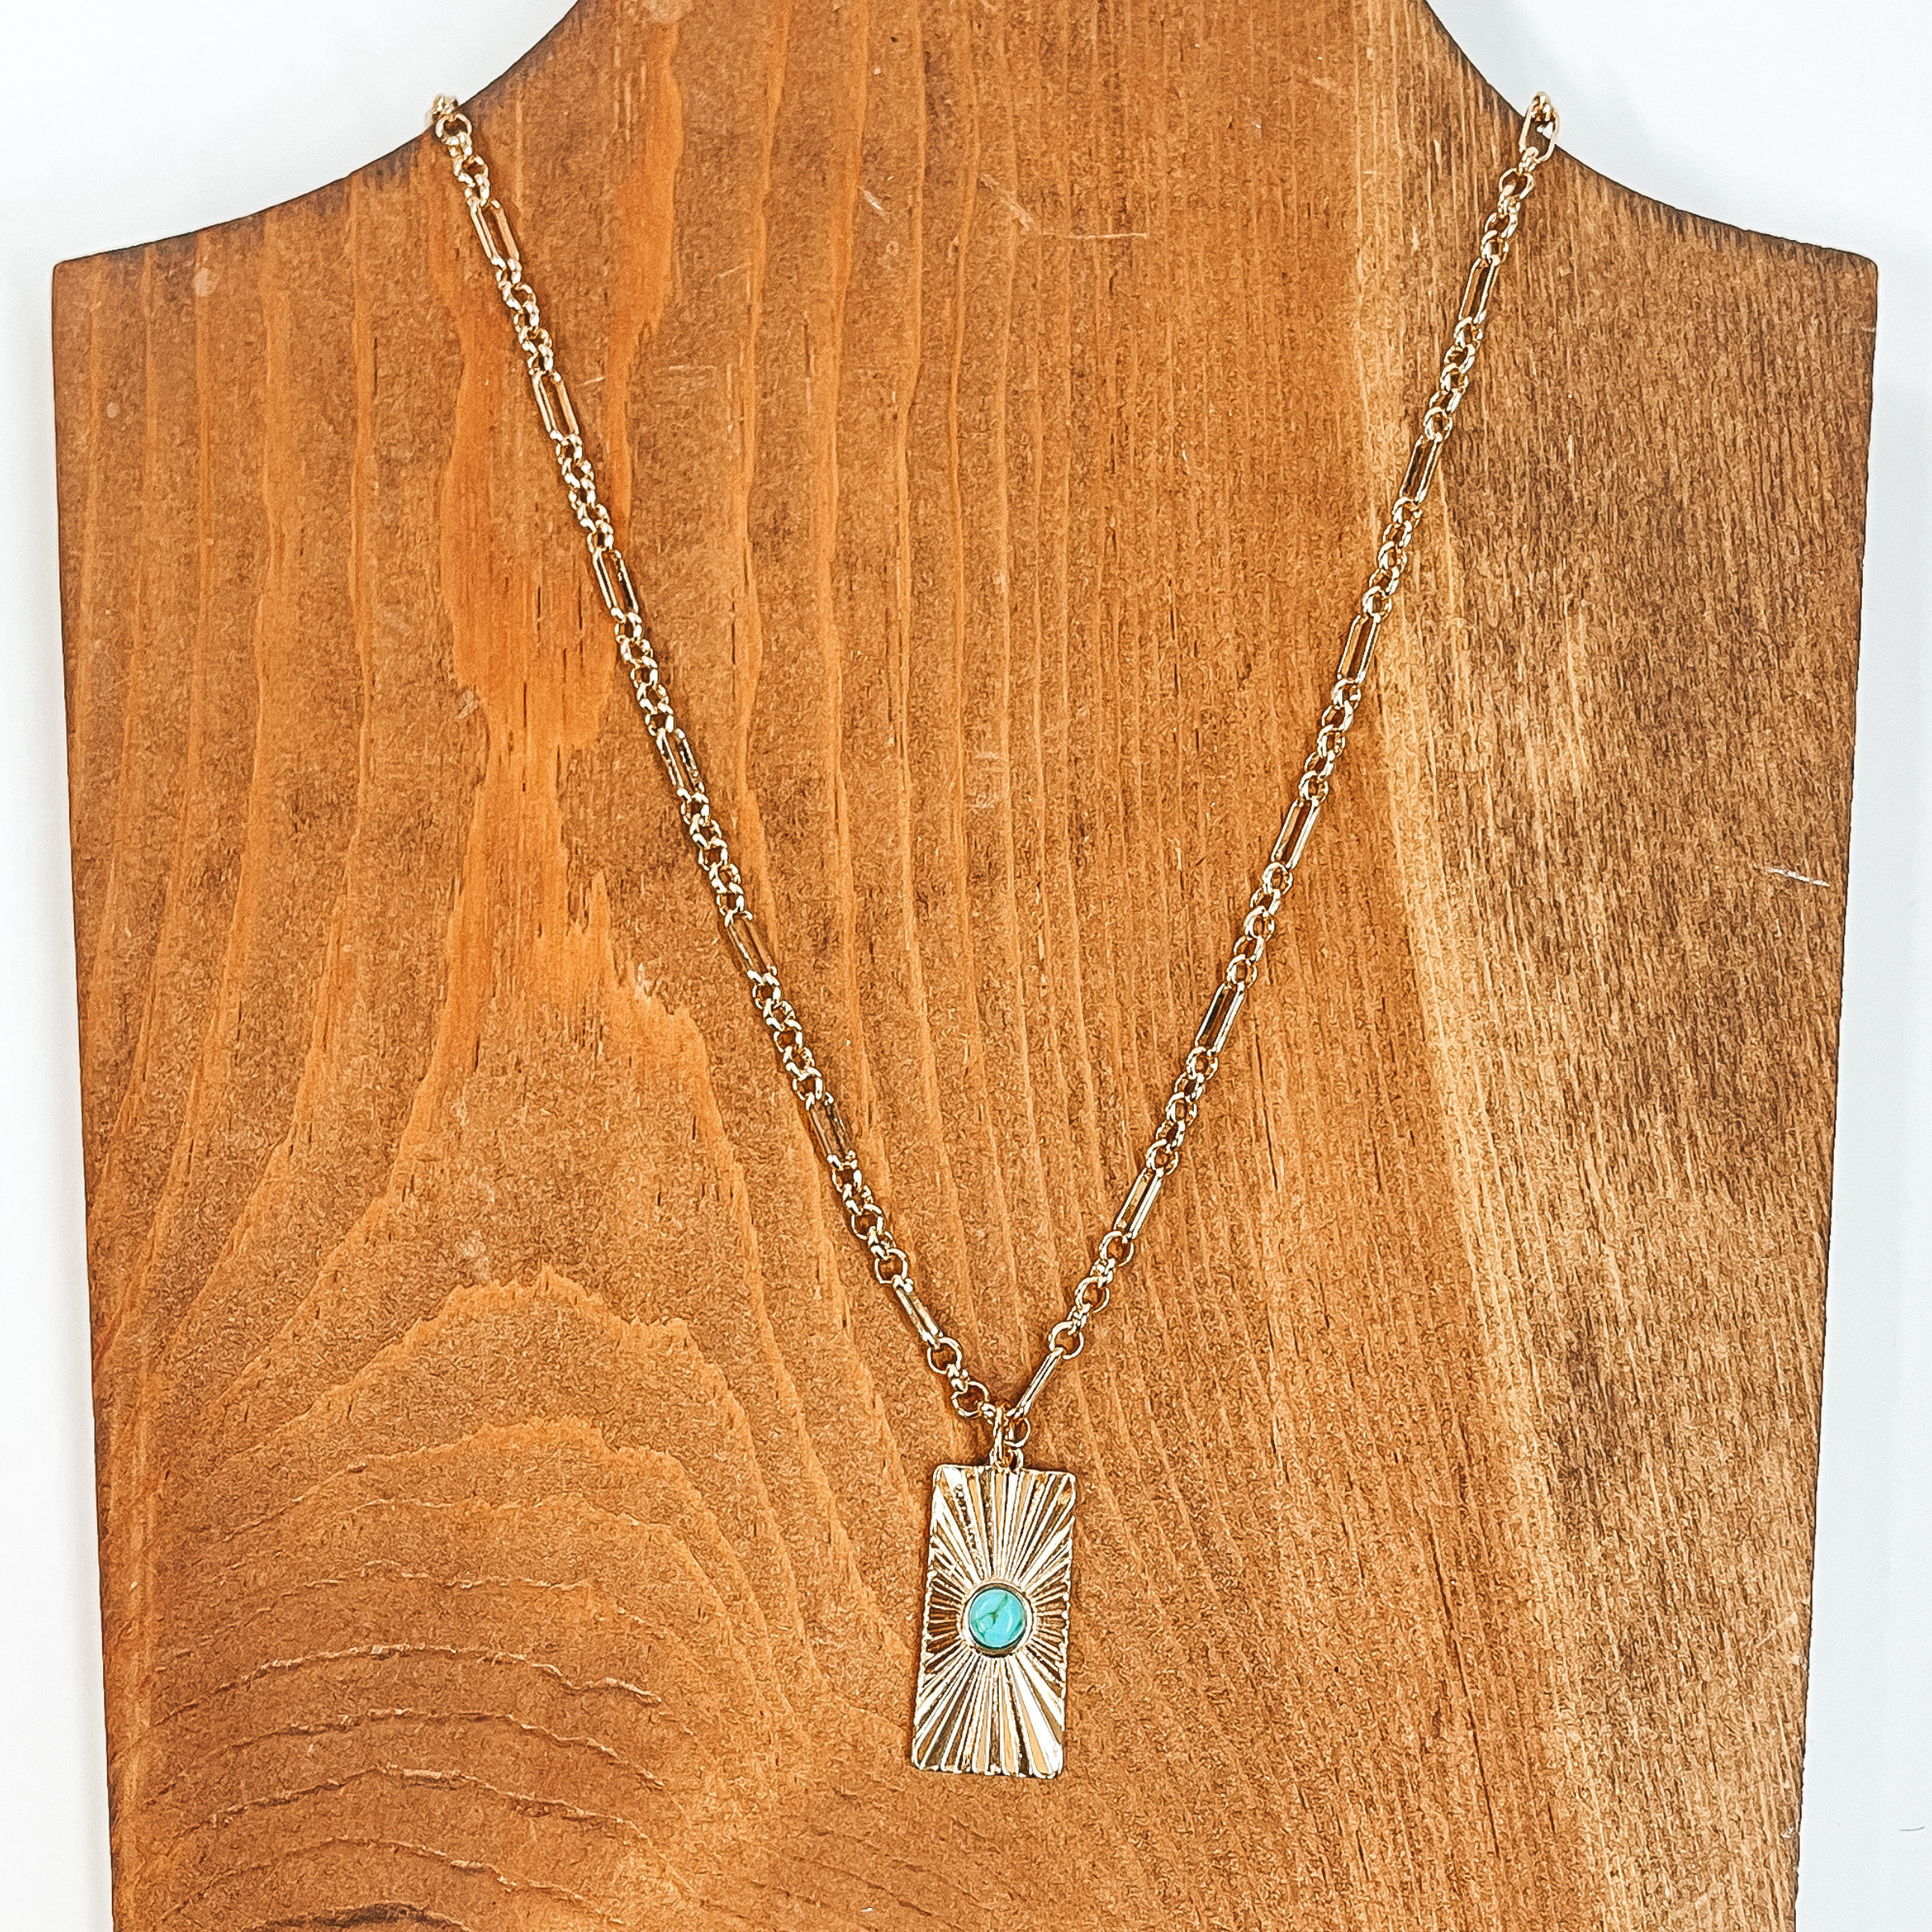 This is a gold chain necklace with a rectangle  pendant, the pendant has a sunburst texture and  a small stone in turquoise. This necklace is  taken on  a brown necklace board and a white background.